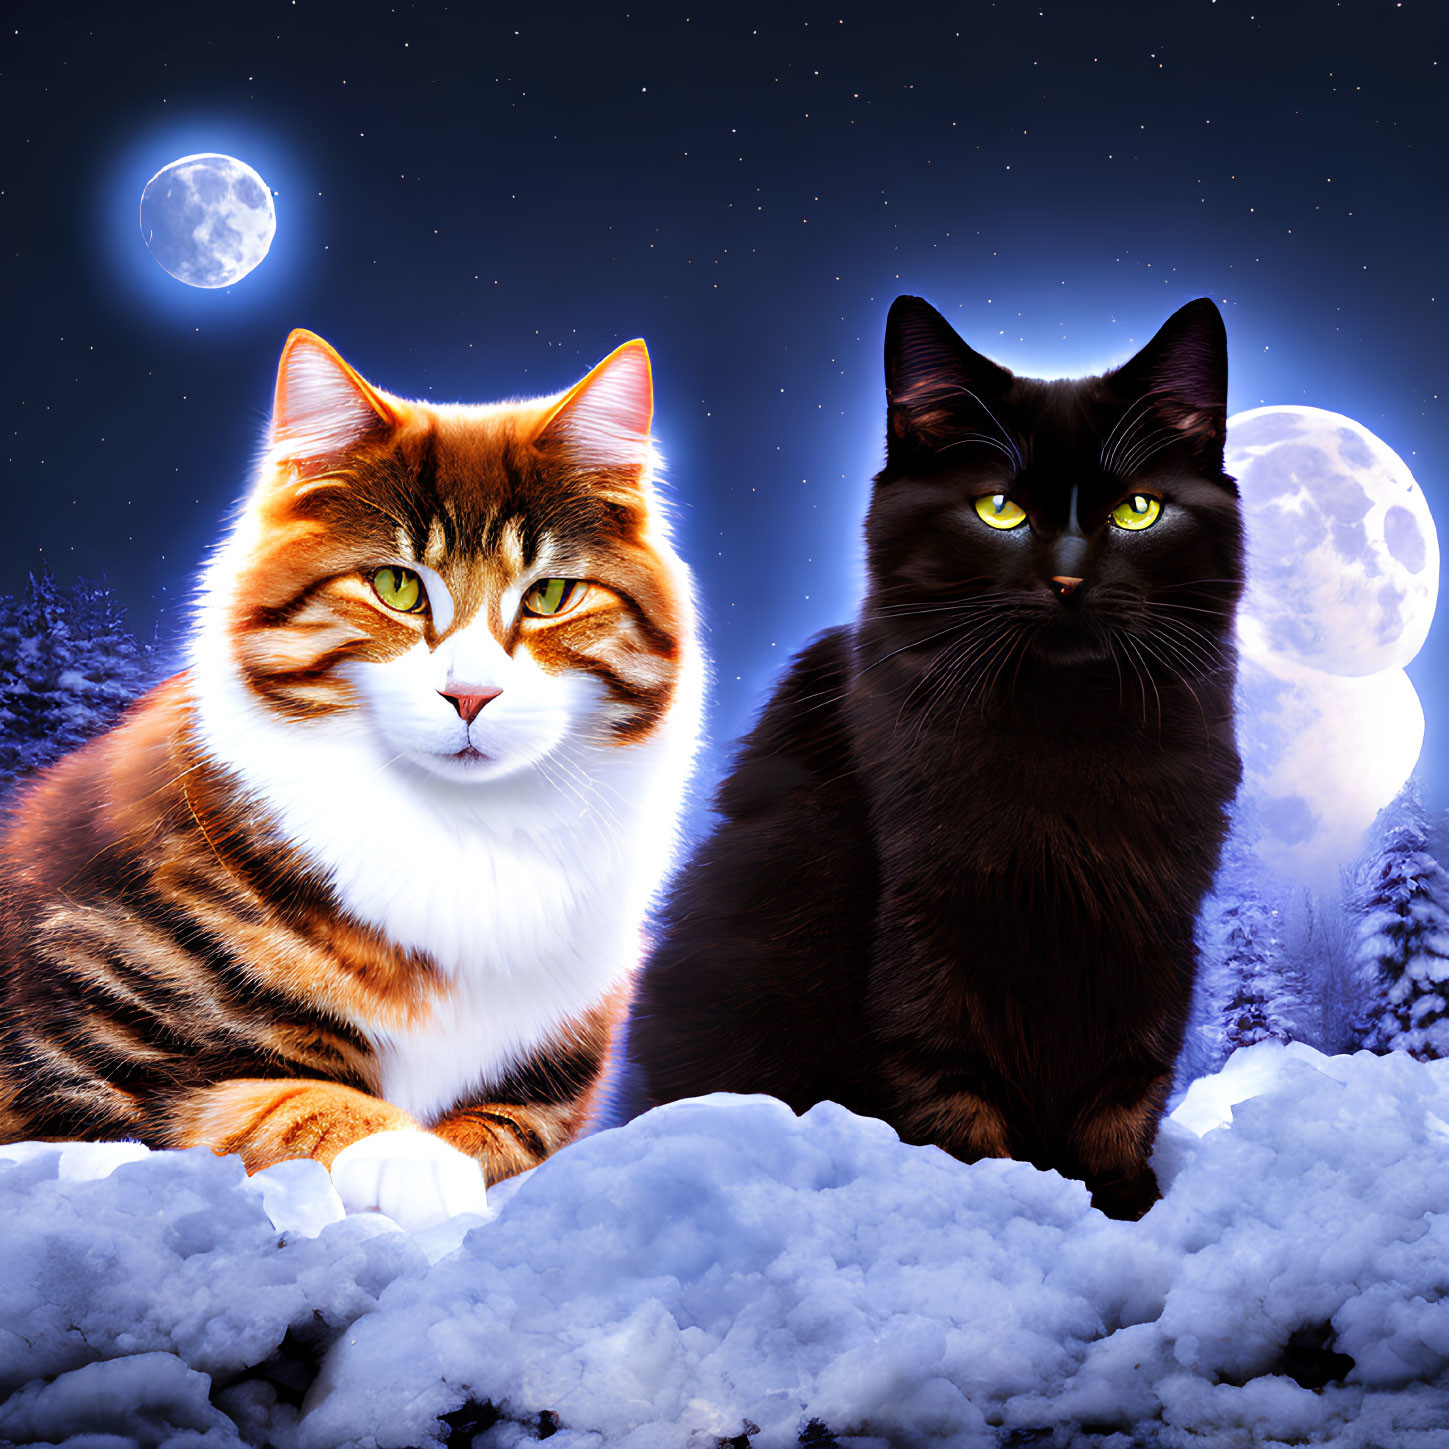 Two cats in snowy night scene with double moons and stars